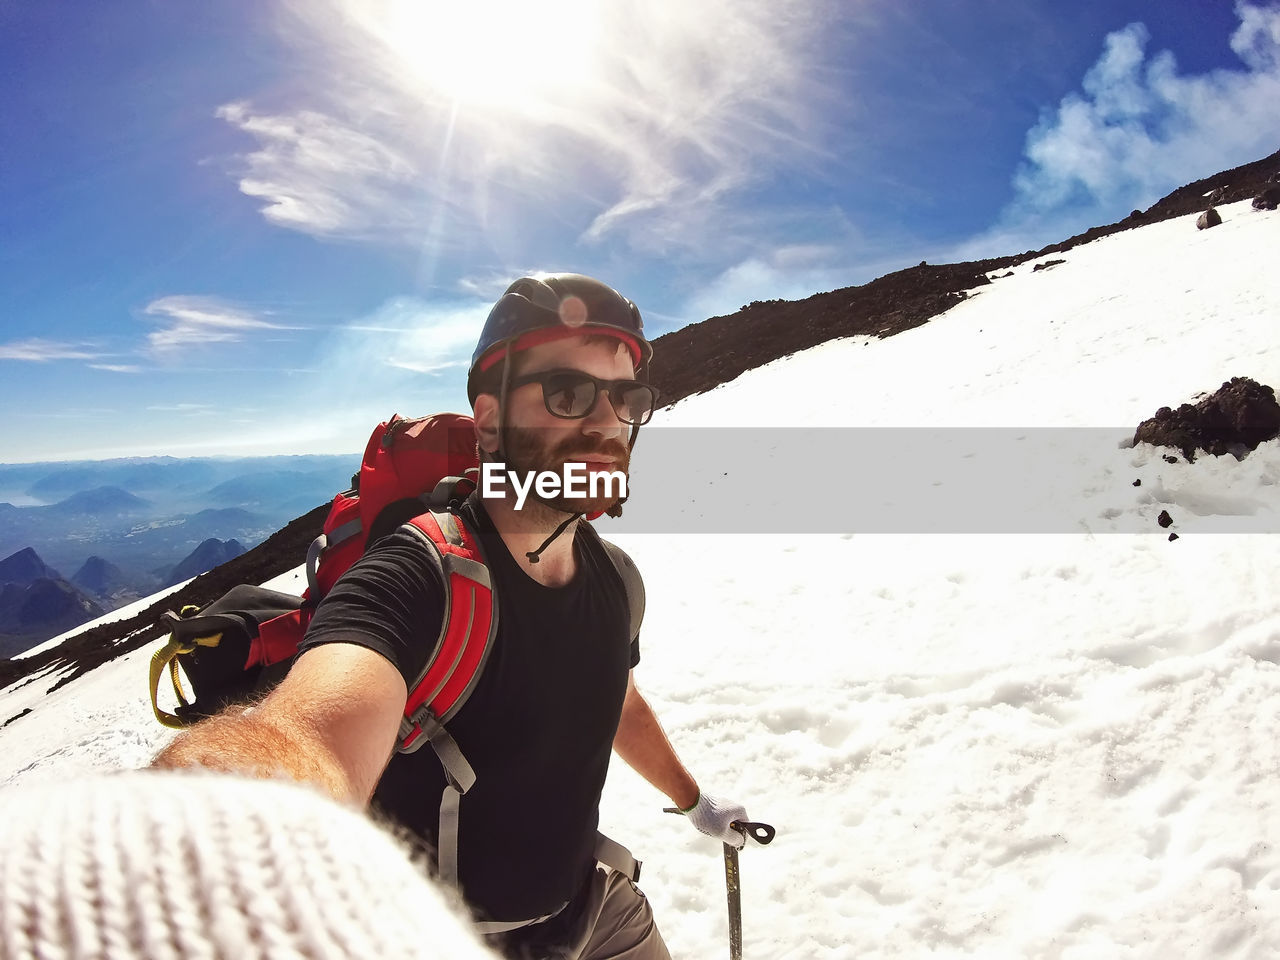 Man wearing sunglasses skiing on snow against sky during winter